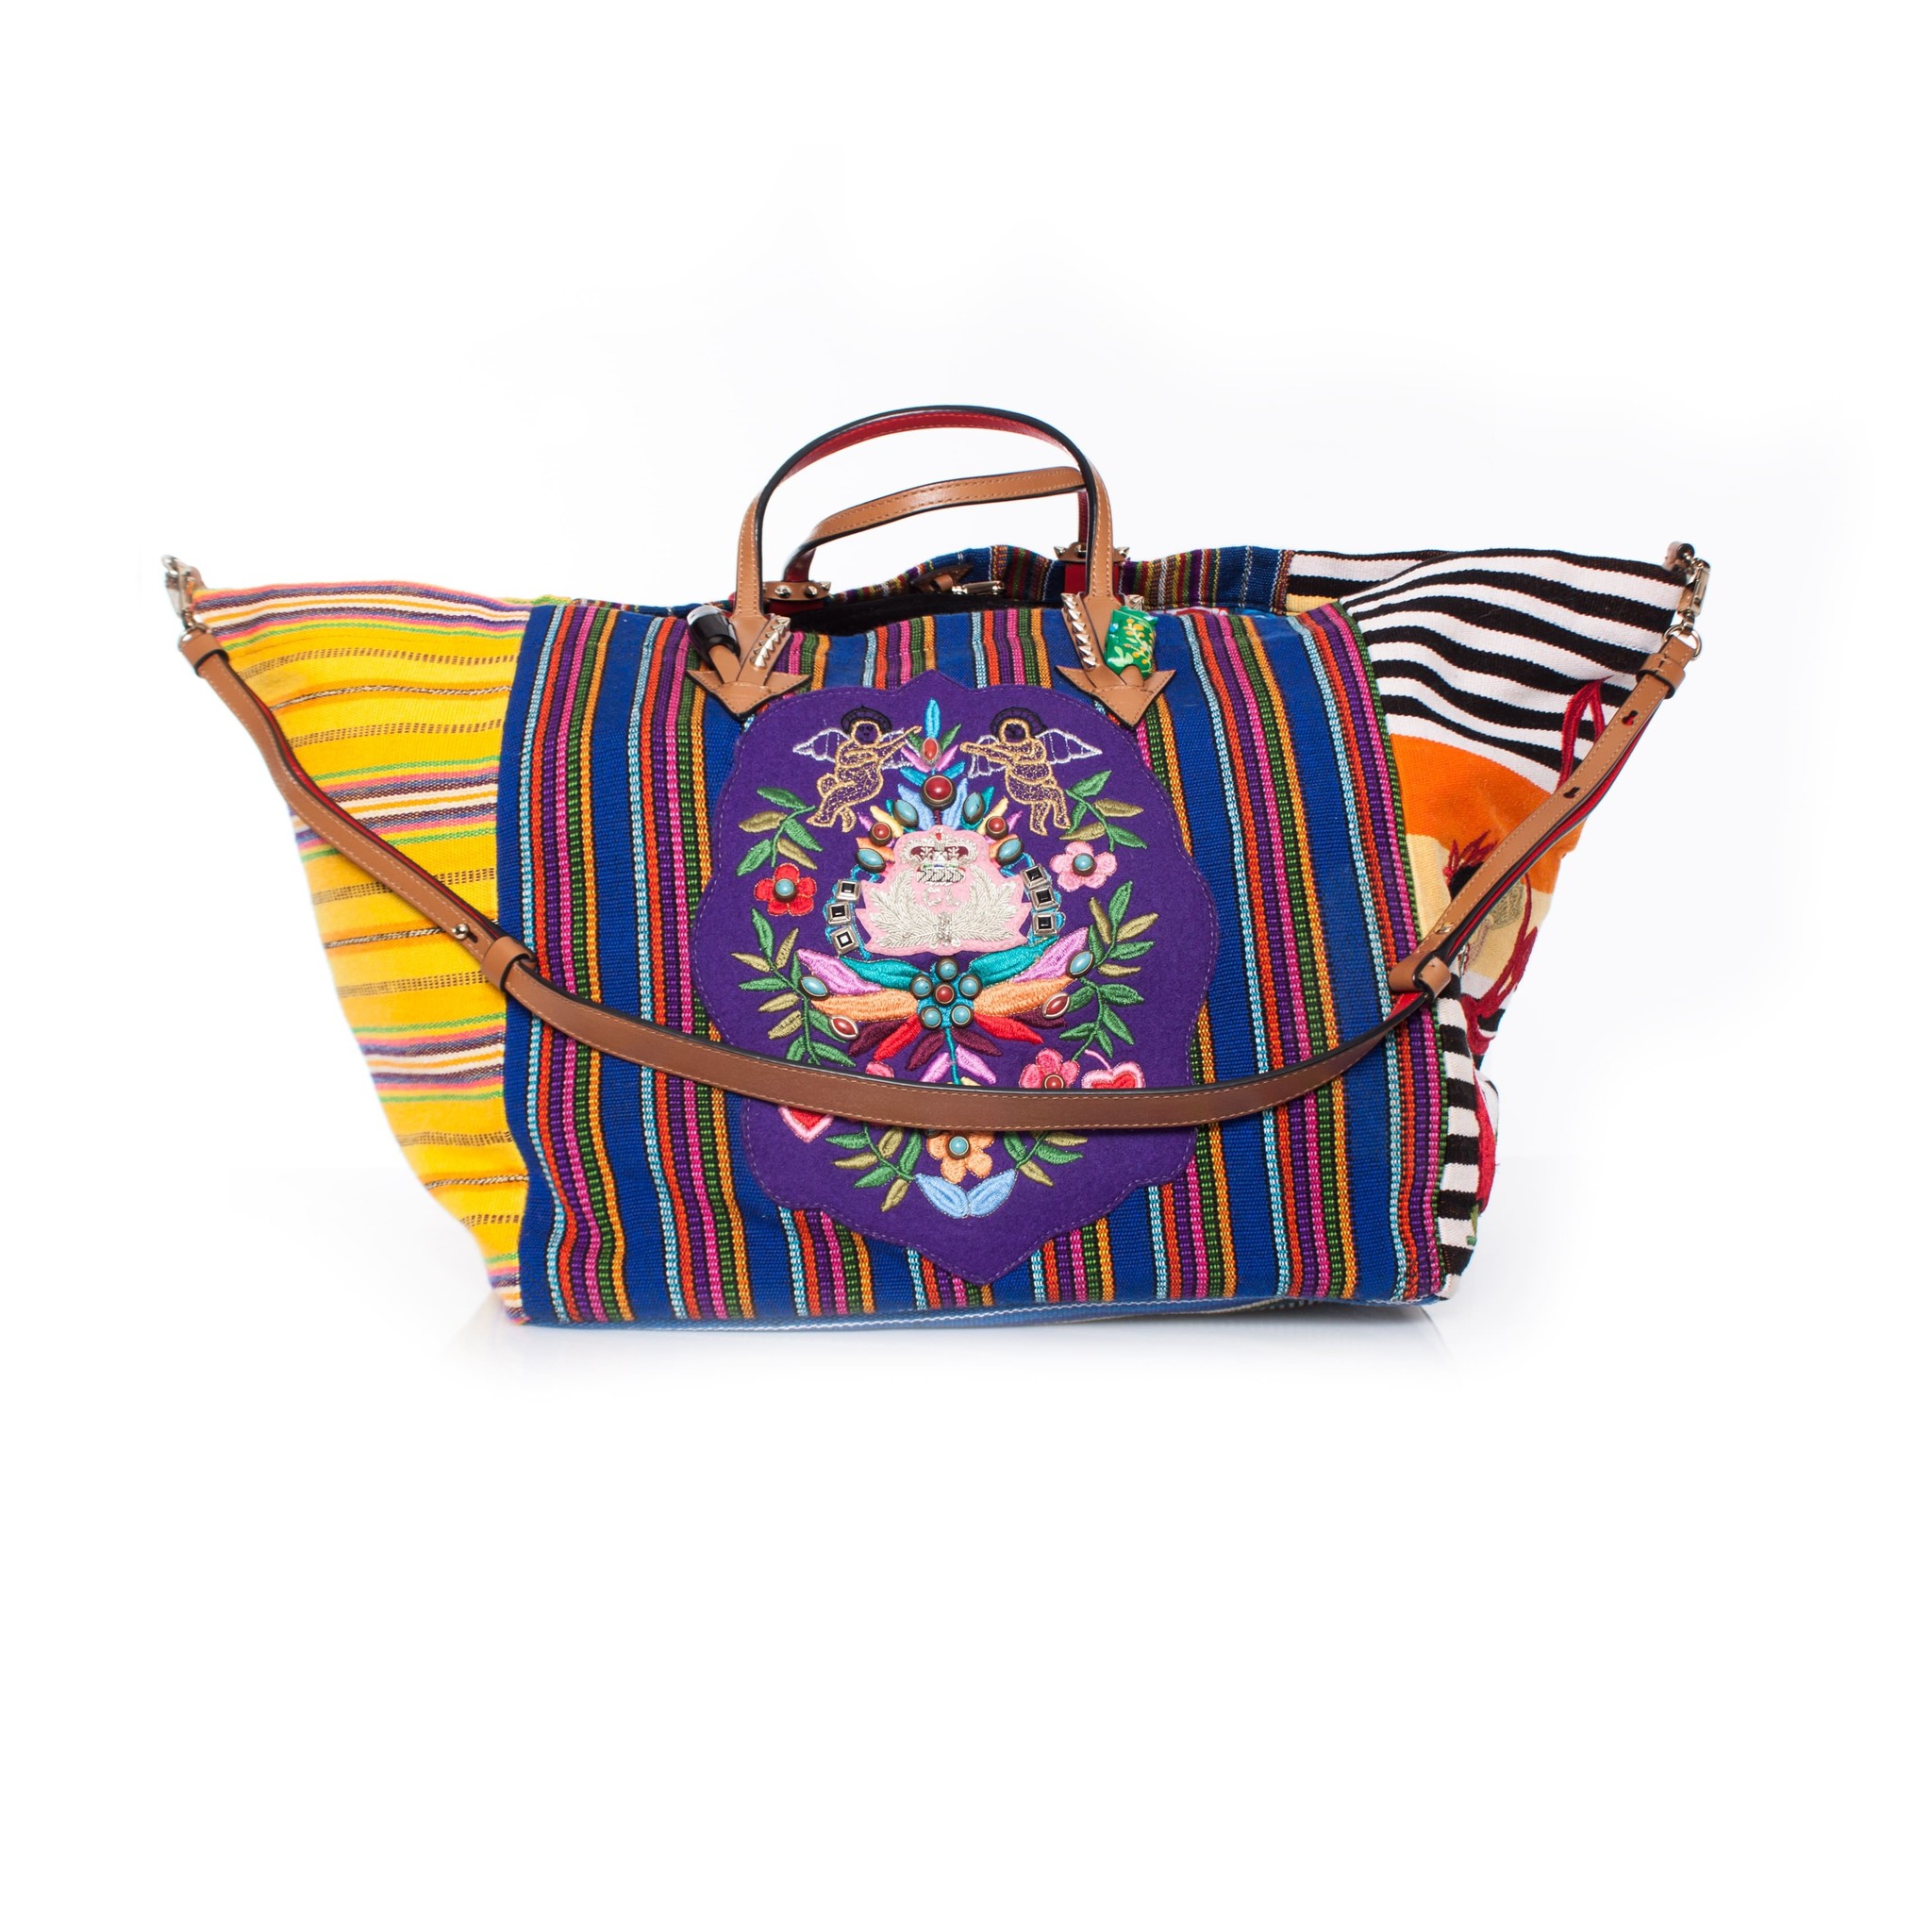 Mexicaba: Christian Louboutin's Celebration Of Mexican Zest